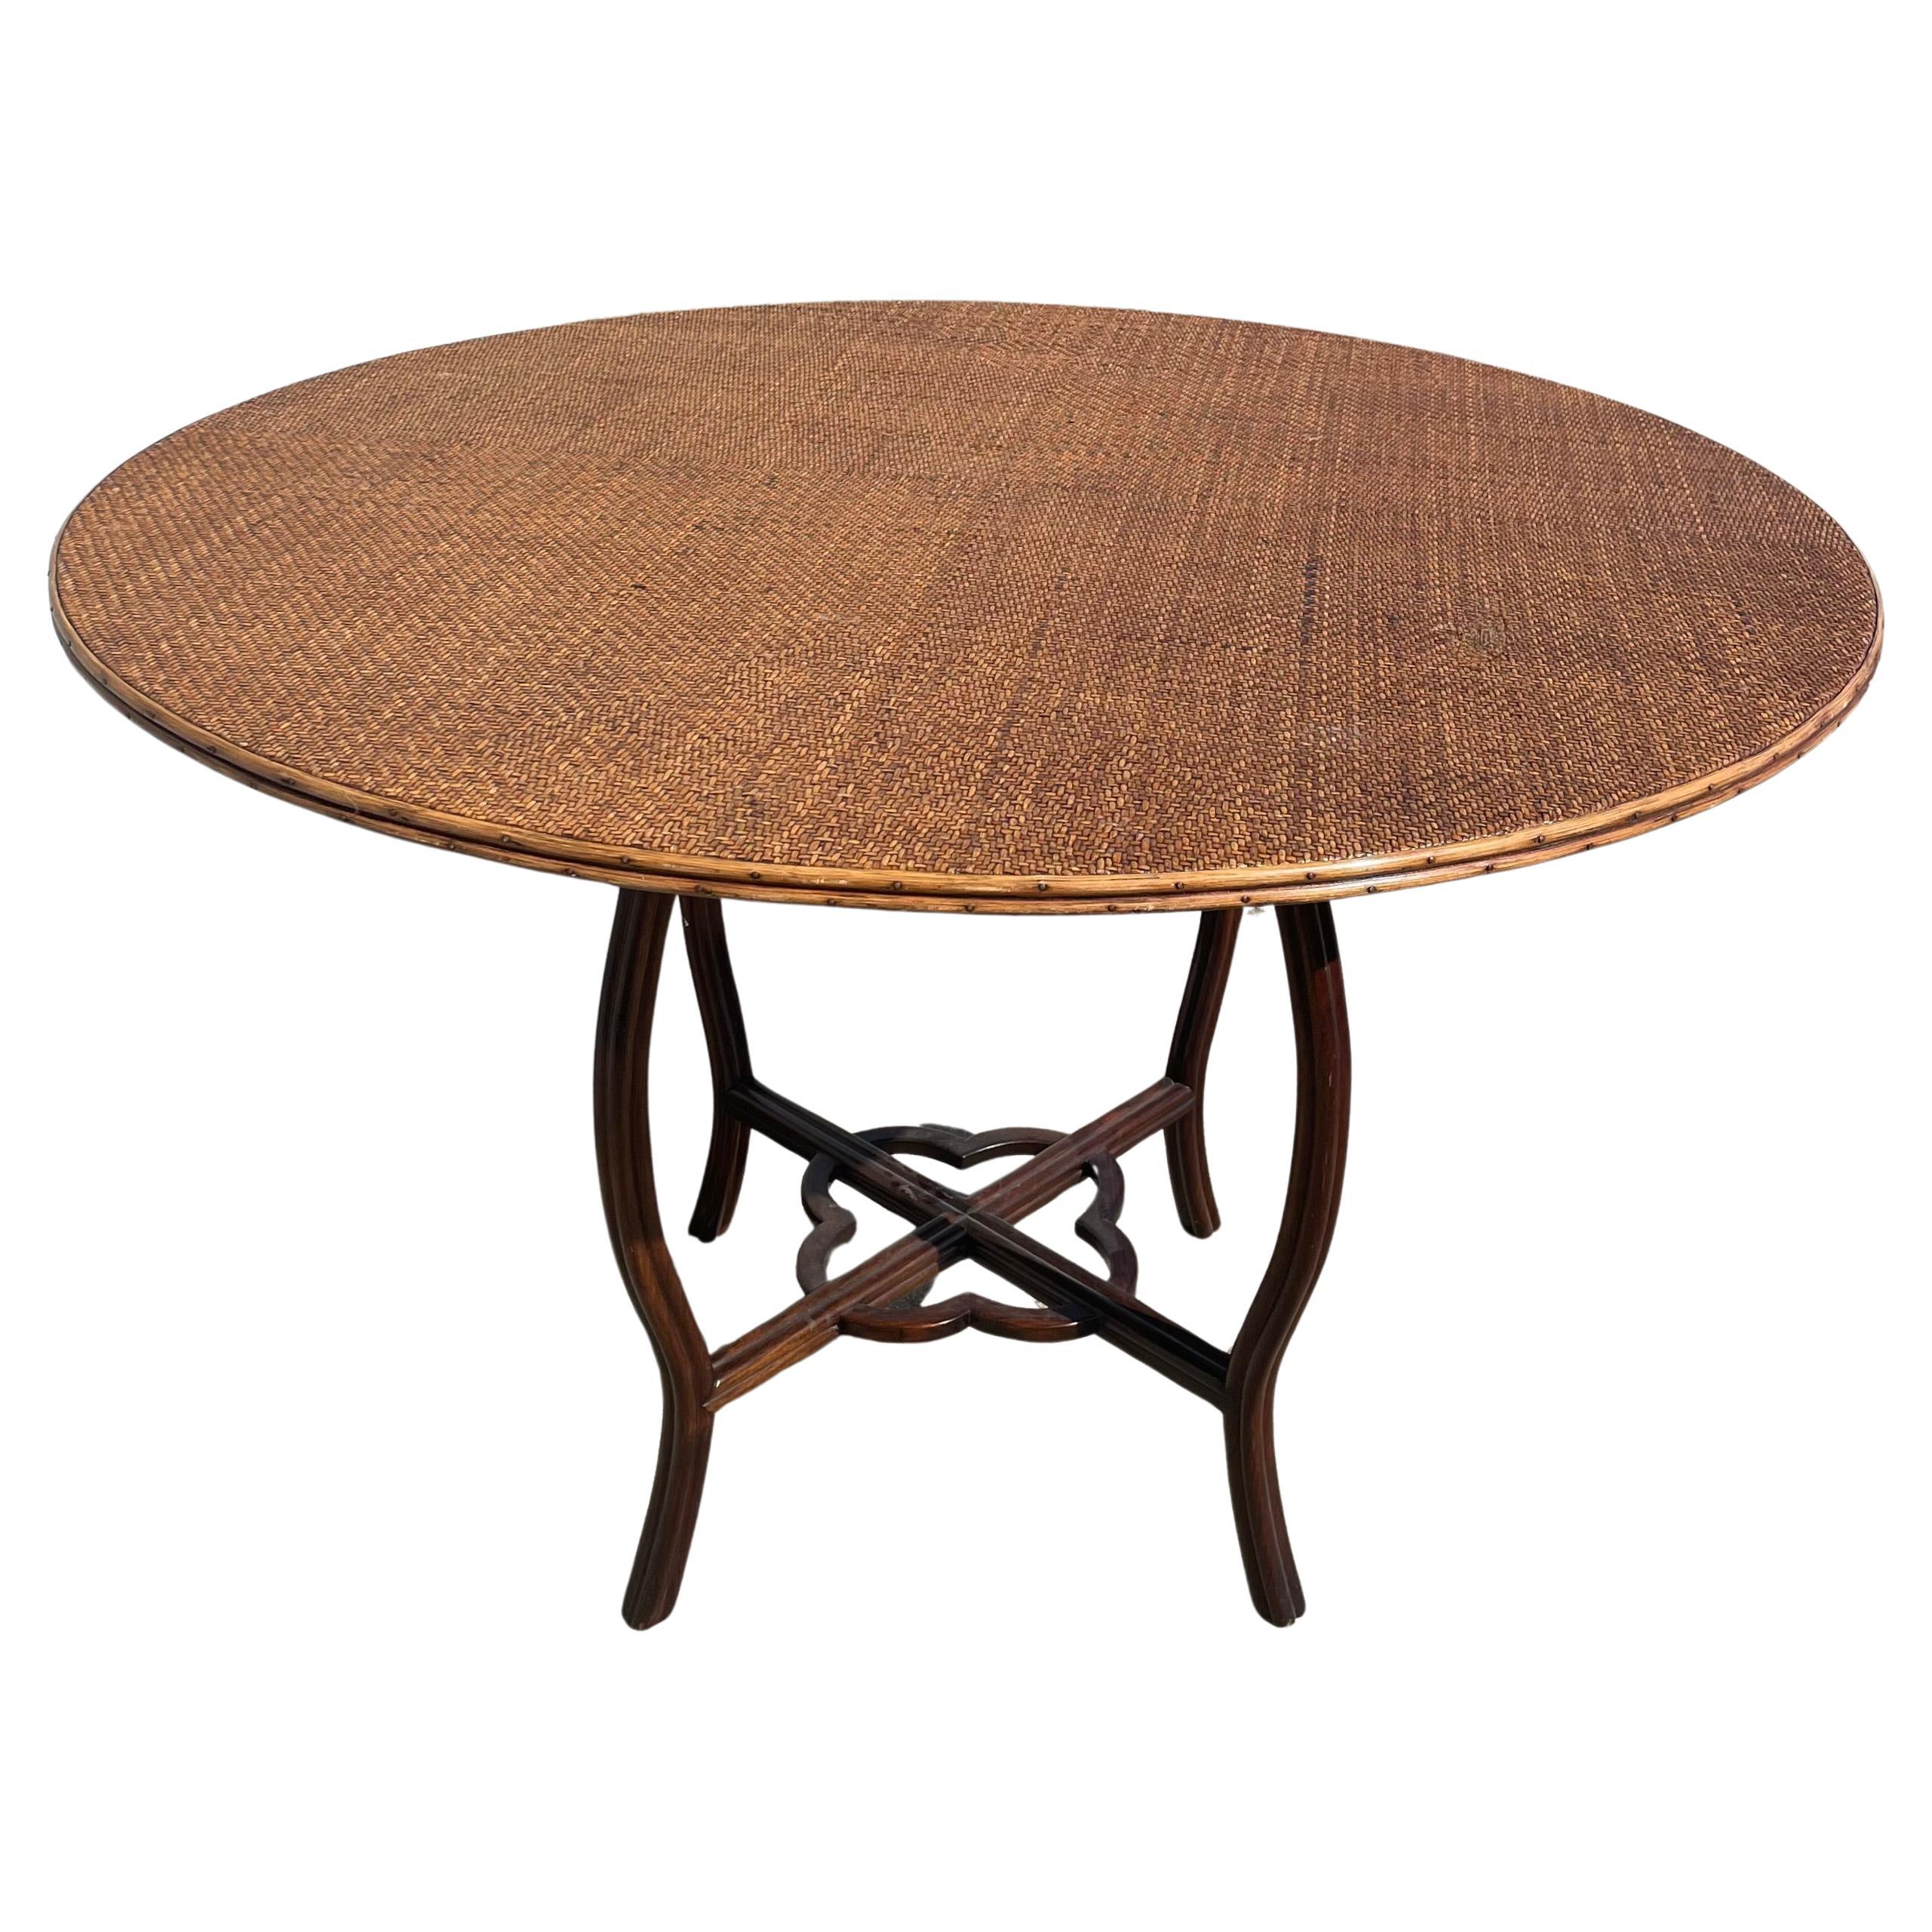 Rattan Top Round Dining Table